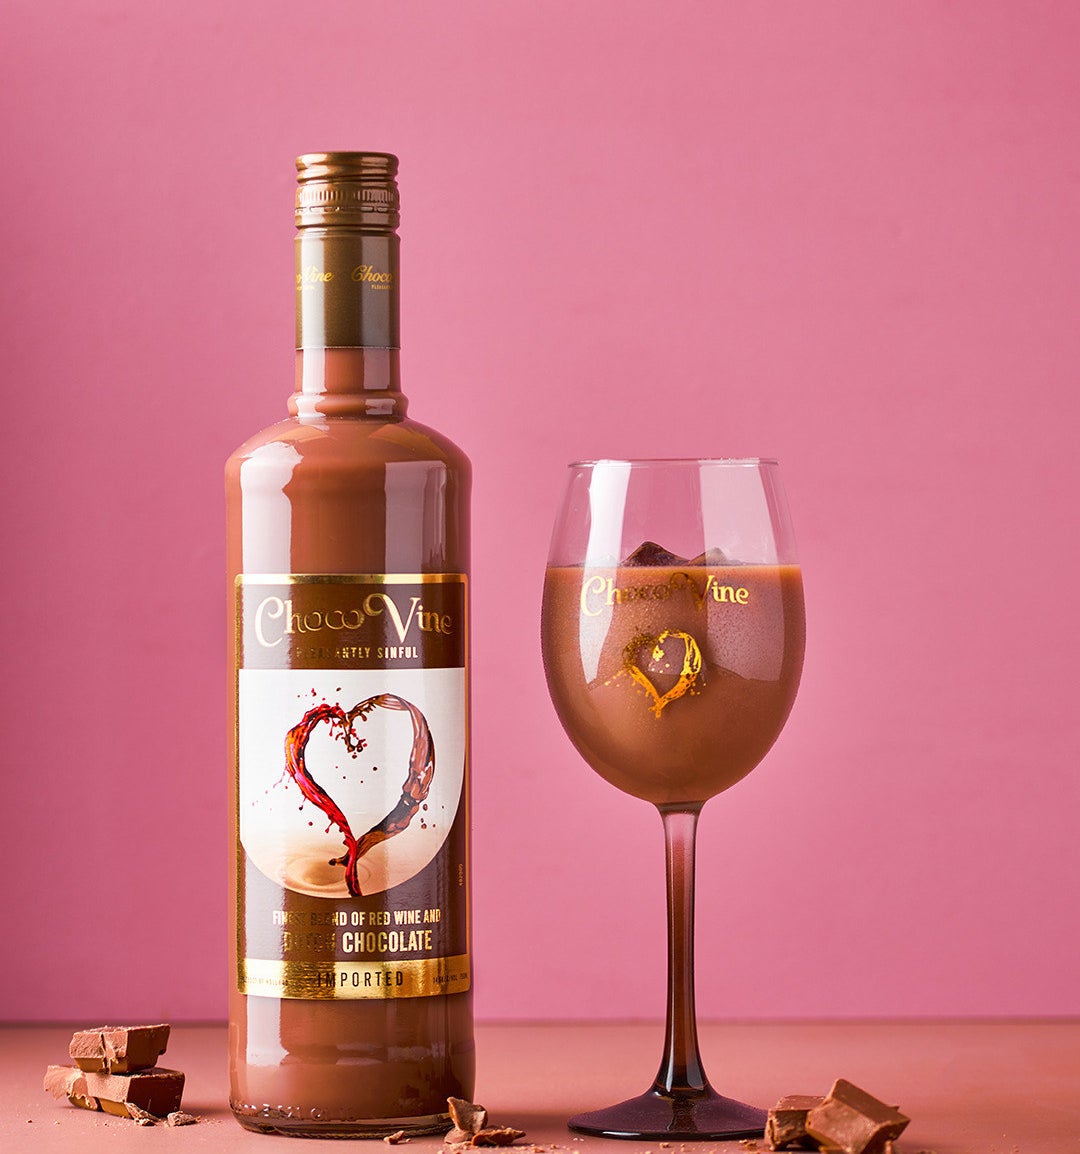 Bottle of ChocoVine next to a wine glass filled with the chocolate wine drink